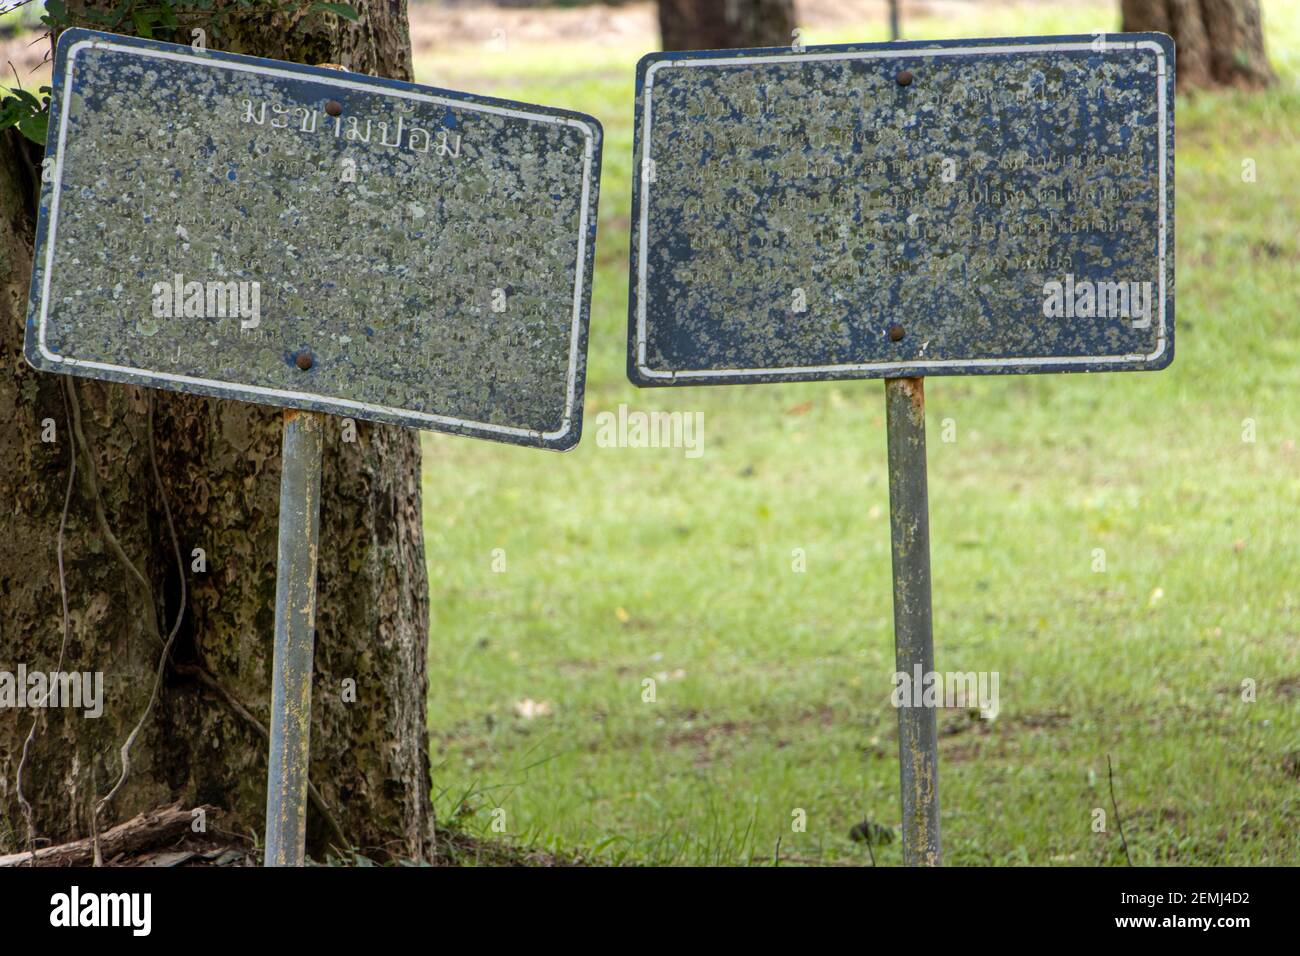 Unreadable inscriptions on information boards in a park on the grounds of a Buddhist monastery, Thailand. Stock Photo